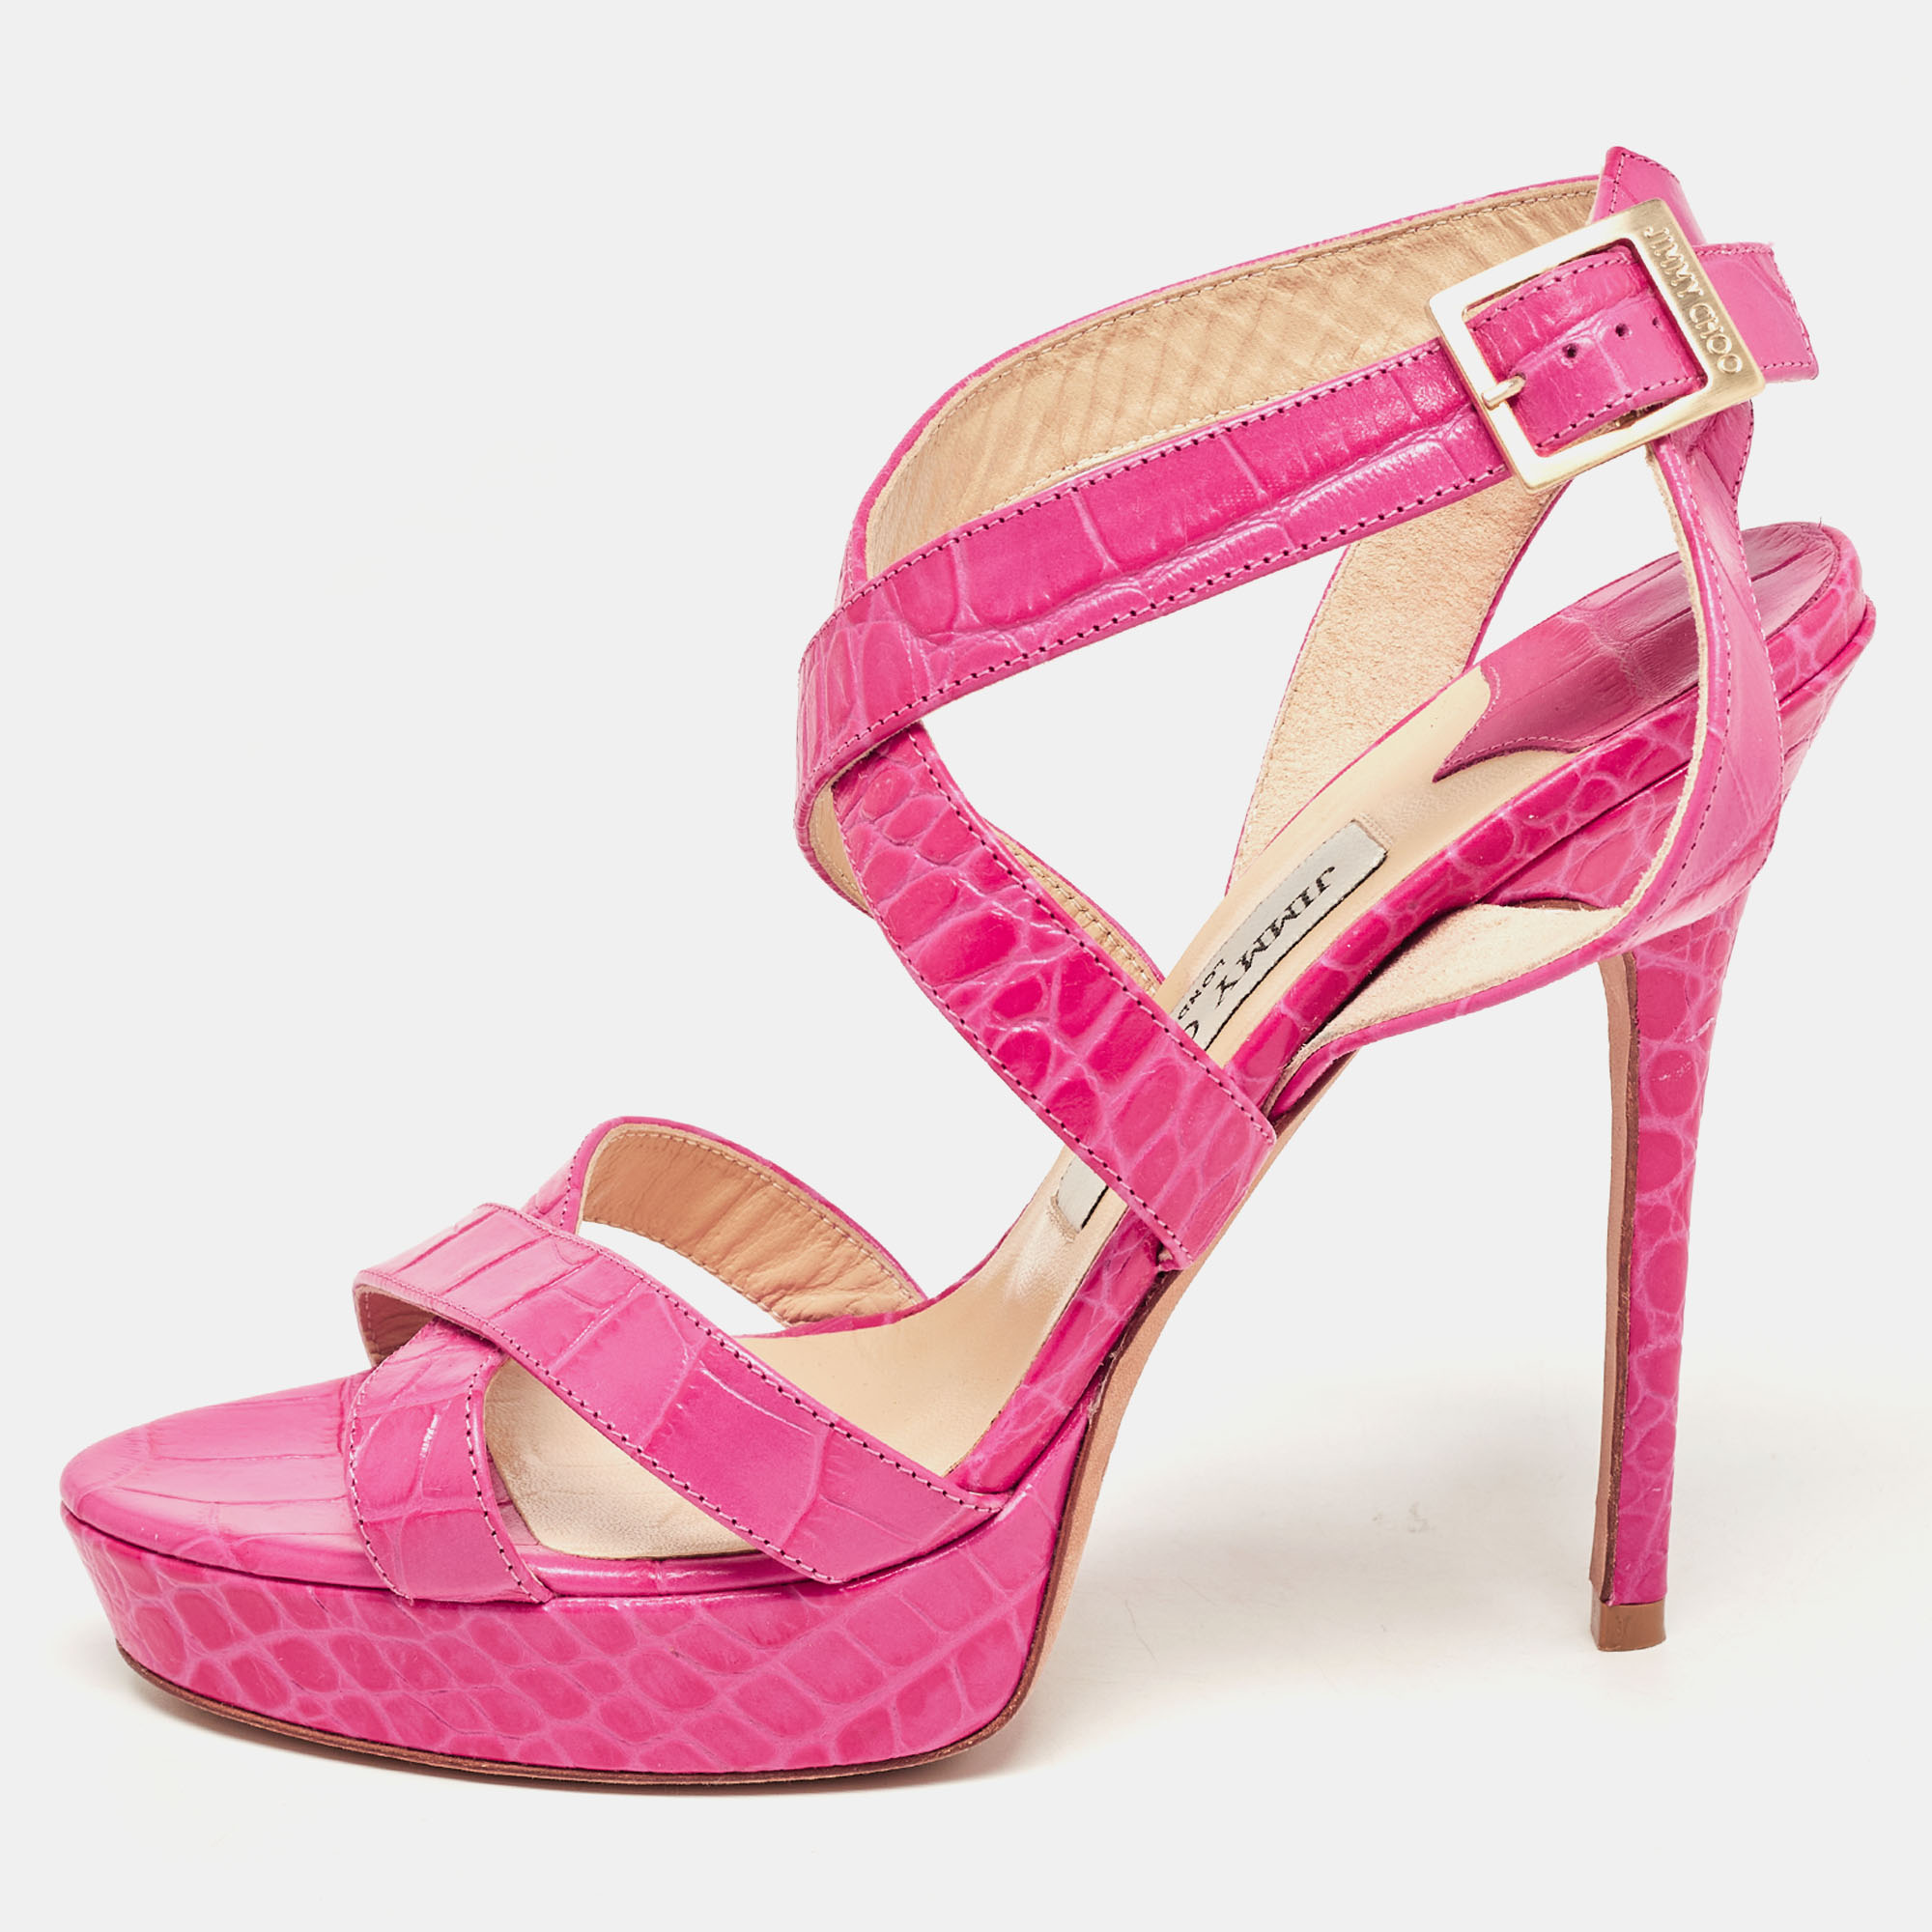 

Jimmy Choo Pink Croc Embossed Leather Strappy Lottie Ankle Strap Sandals Size